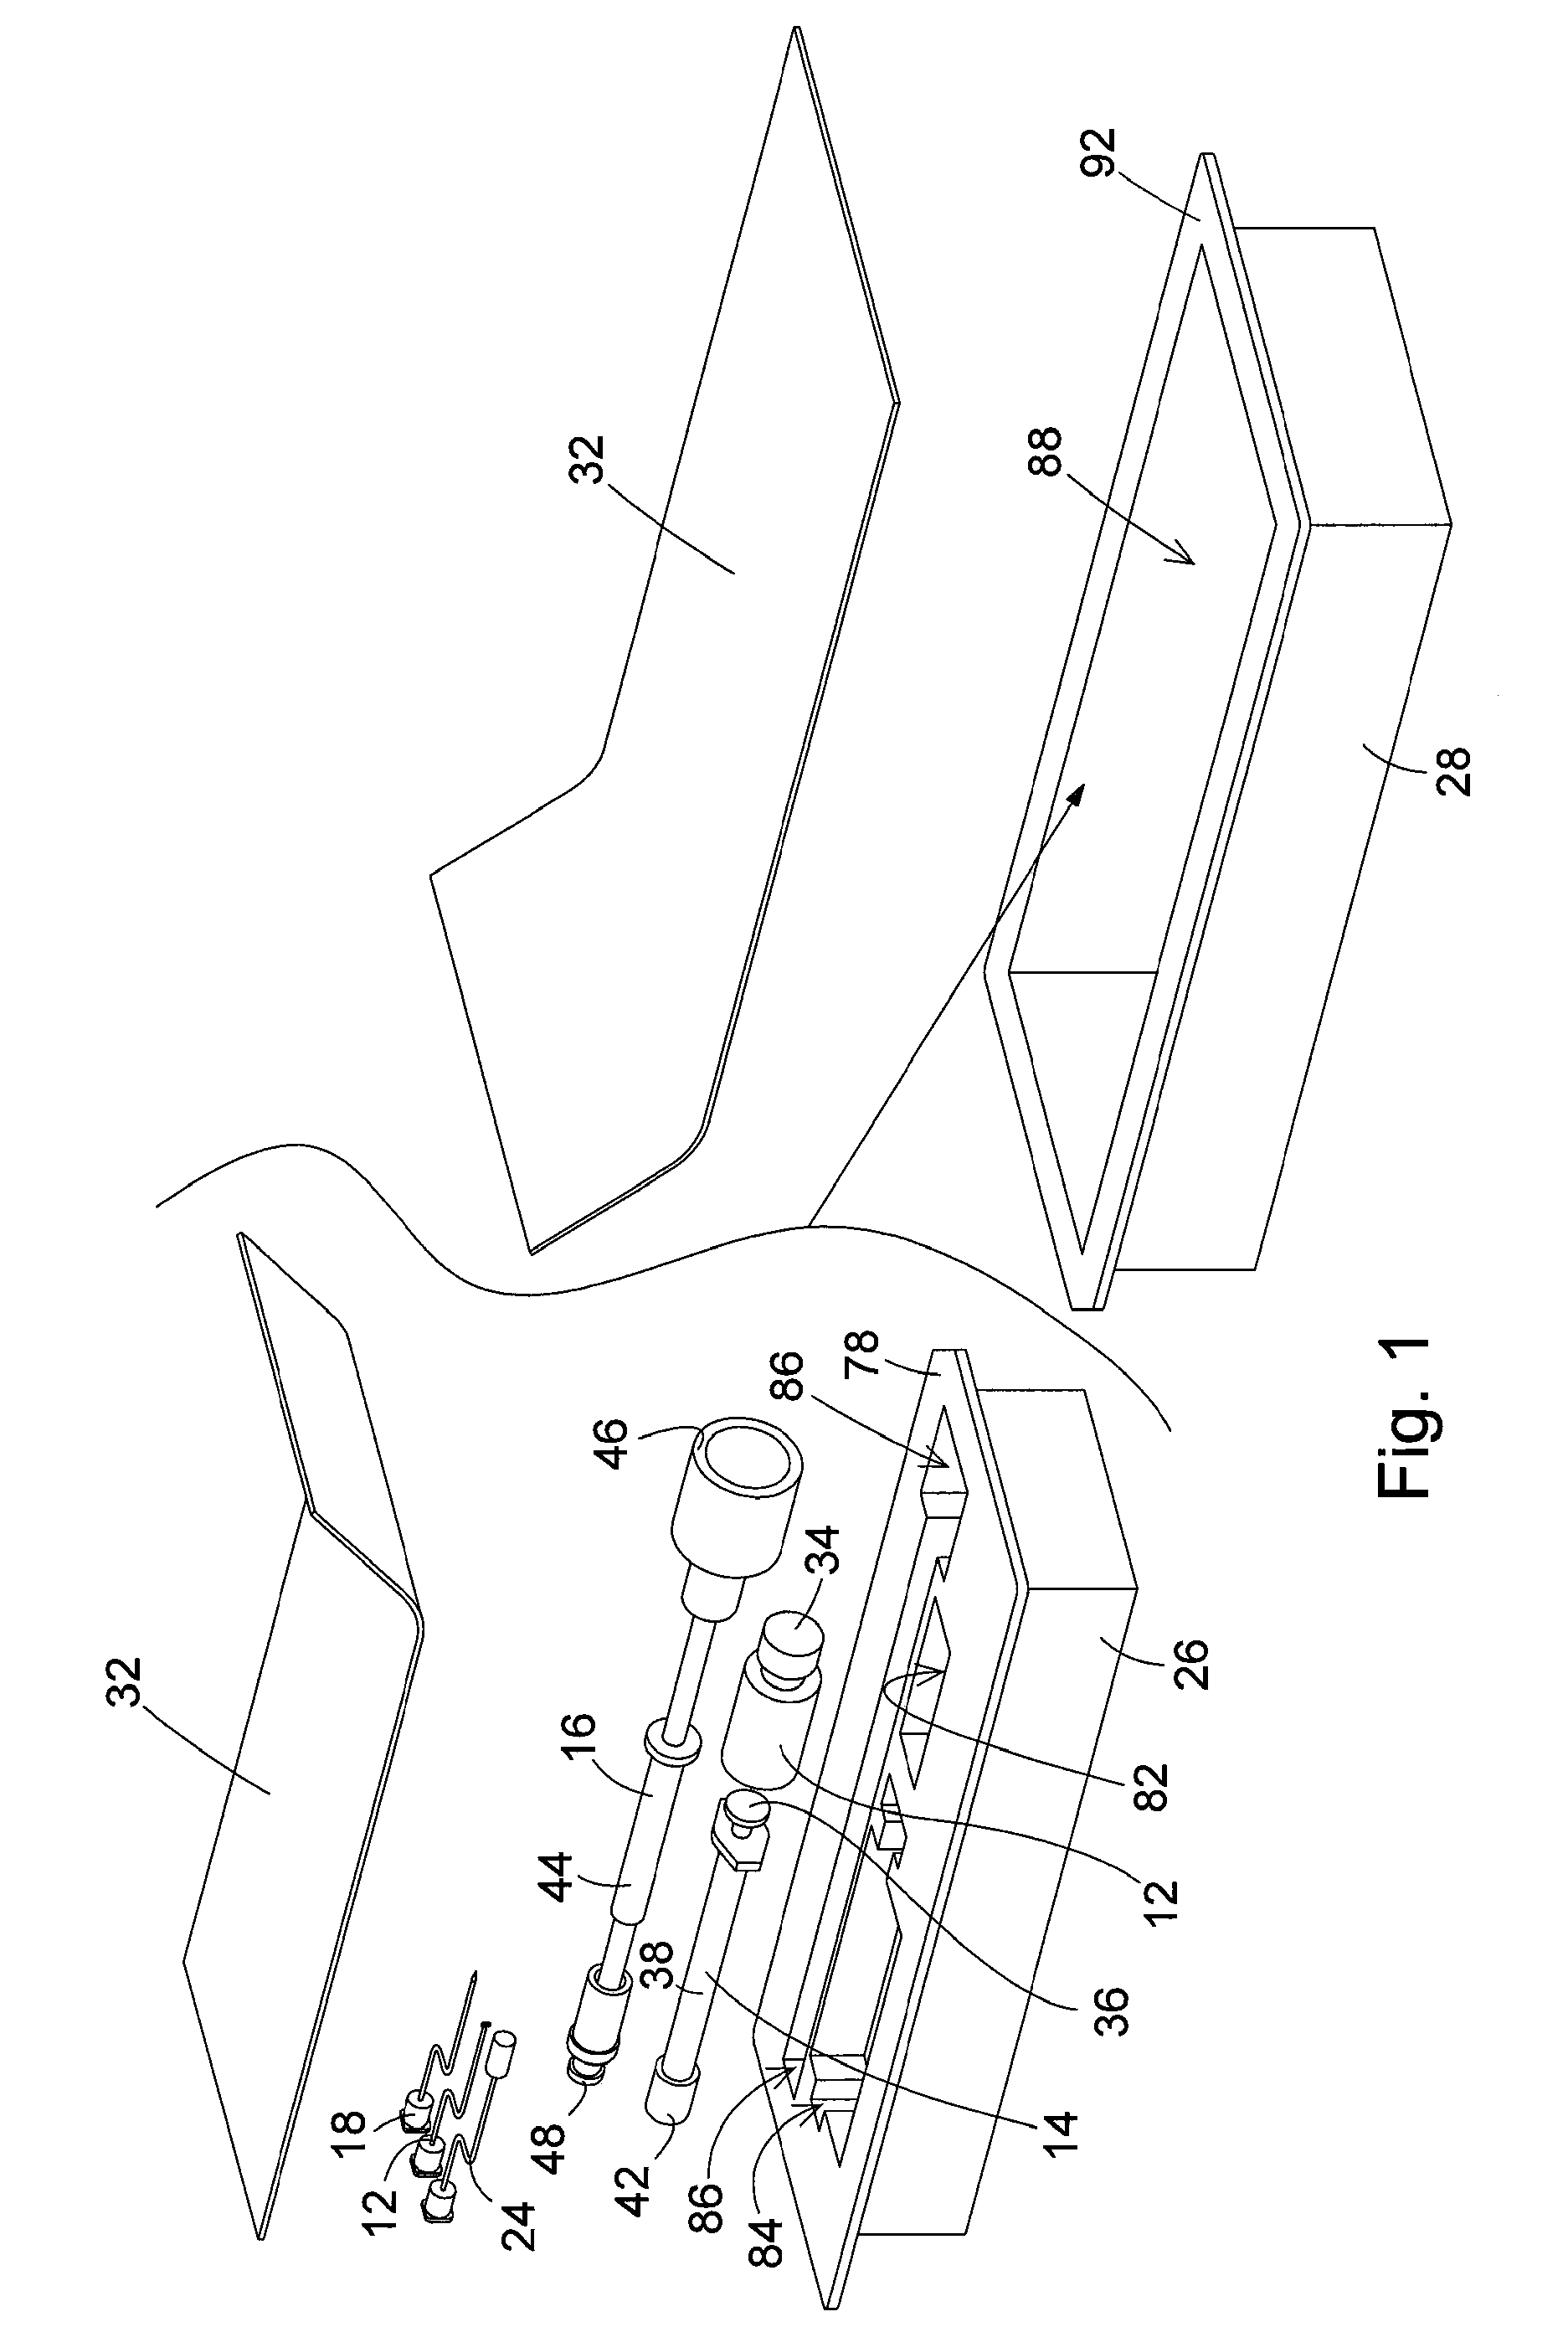 Apparatus and Method for Application of a Pharmaceutical to The Tympanic Membrane for Photodynamic Laser Myringotomy